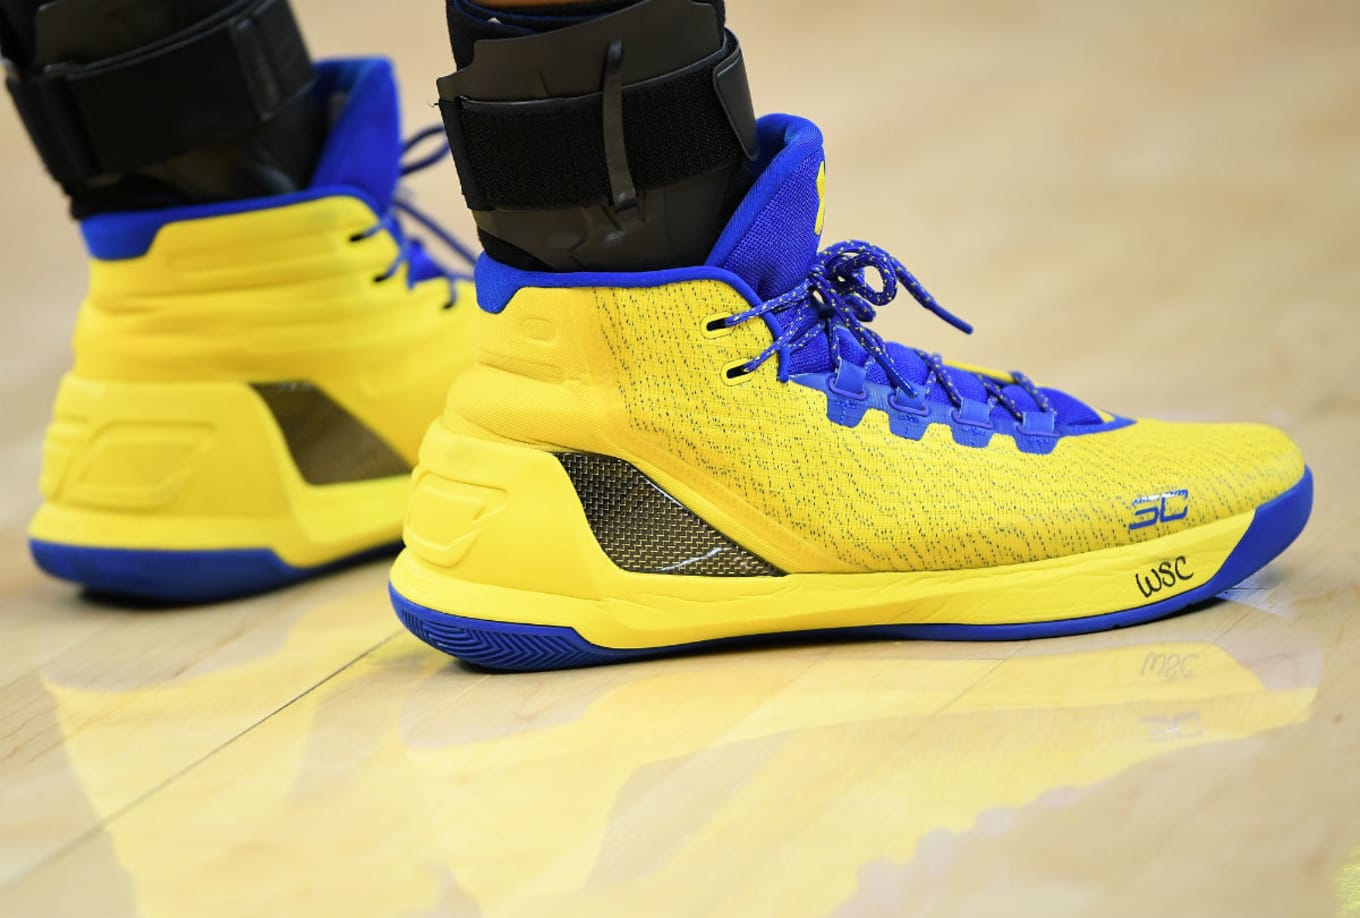 steph curries shoes